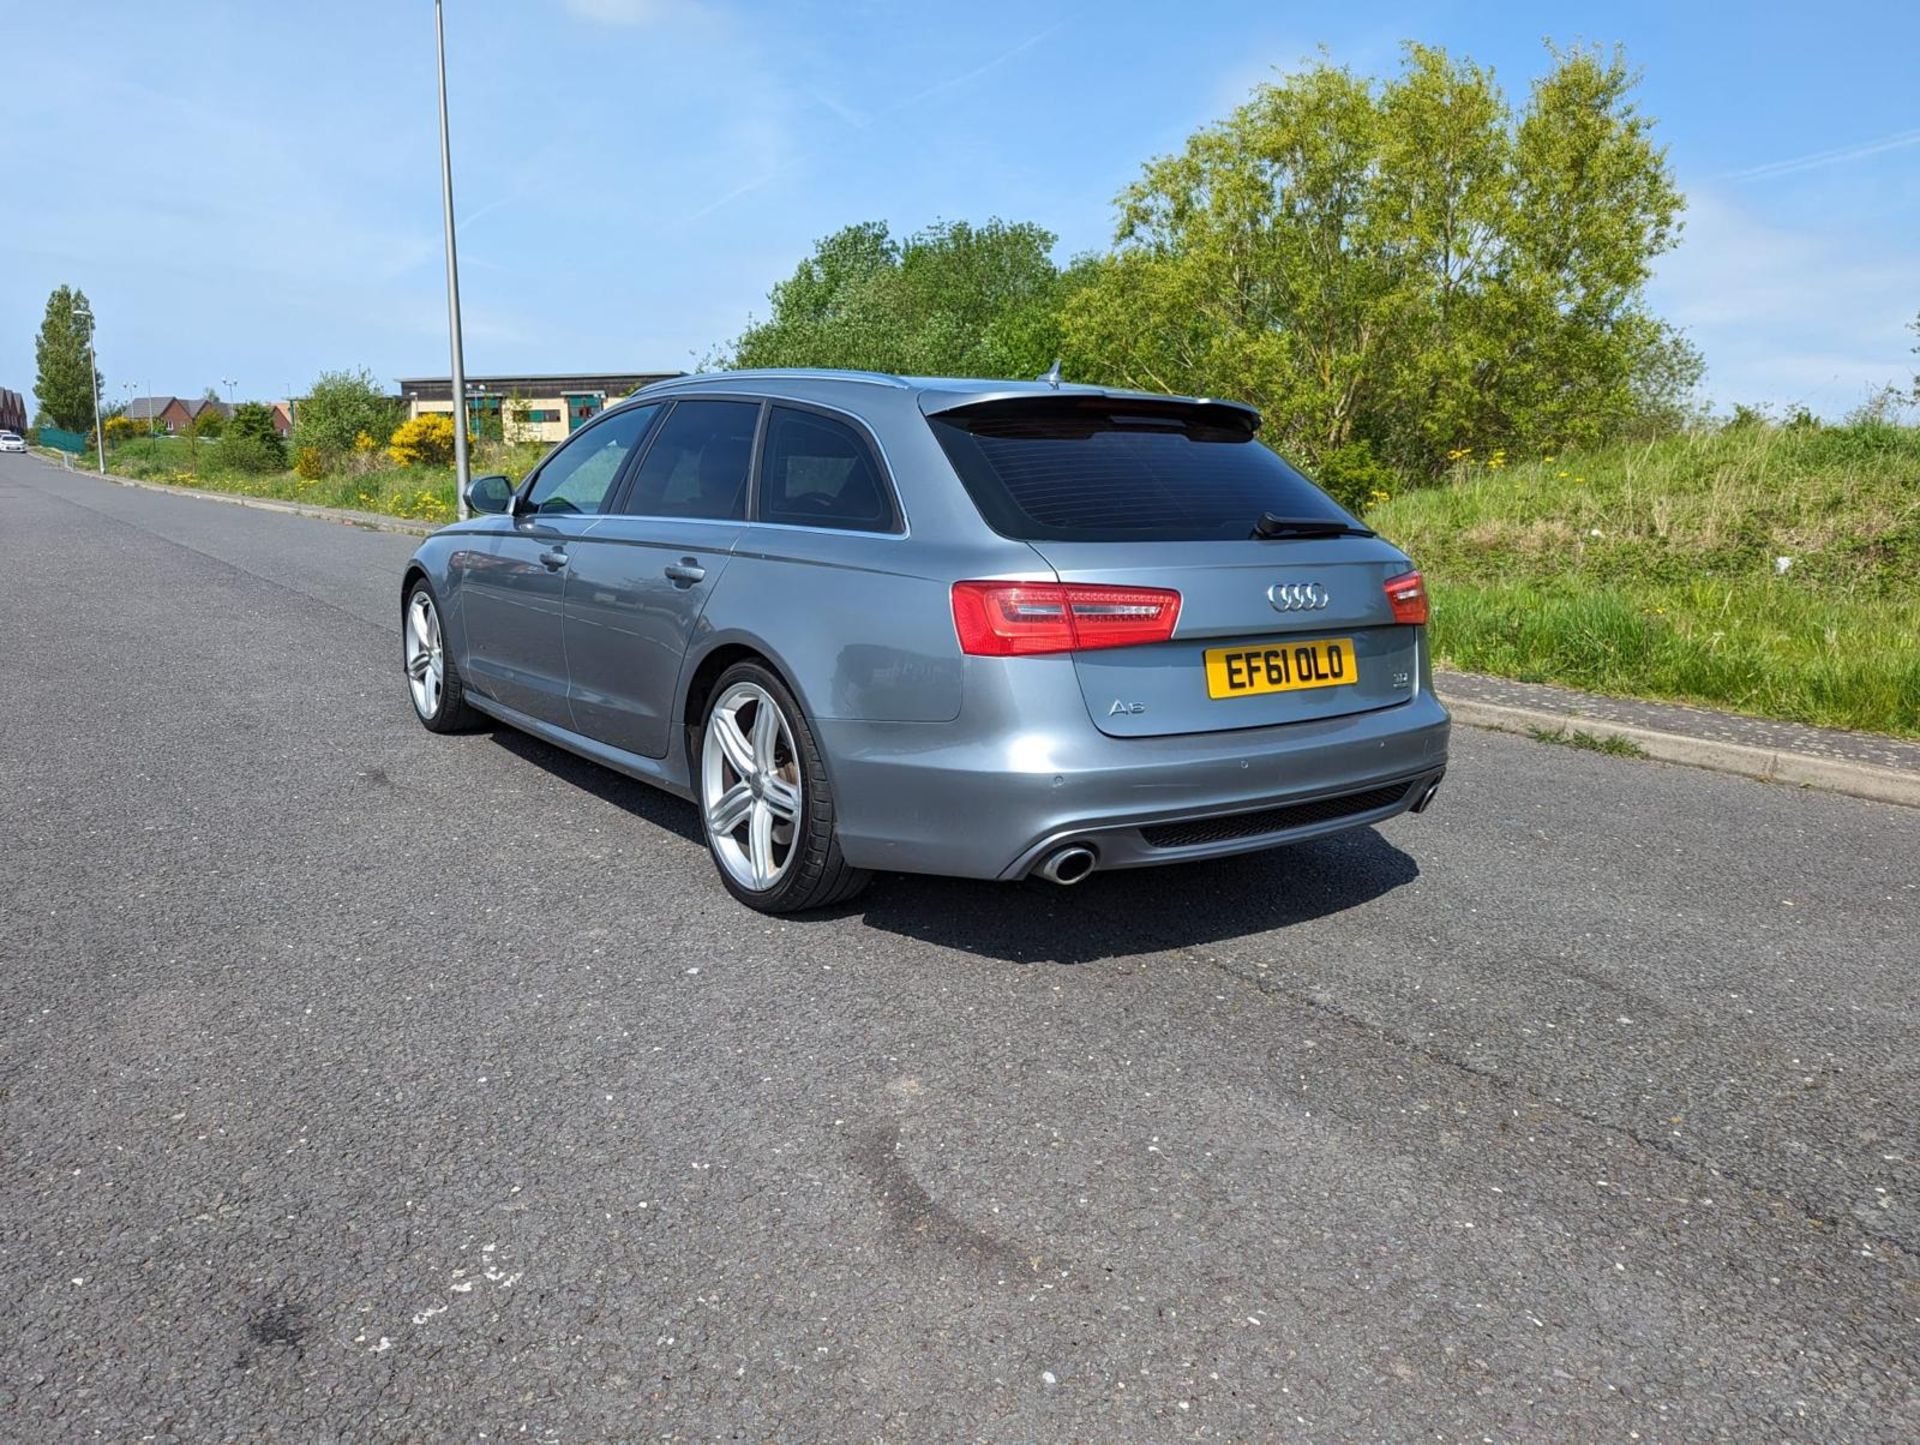 2012/61 REG AUDI A6 S LINE TDI 3.0 DIESEL QUATTRO AUTOMATIC GREY ESTATE, SHOWING 3 FORMER KEEPERS - Image 5 of 52